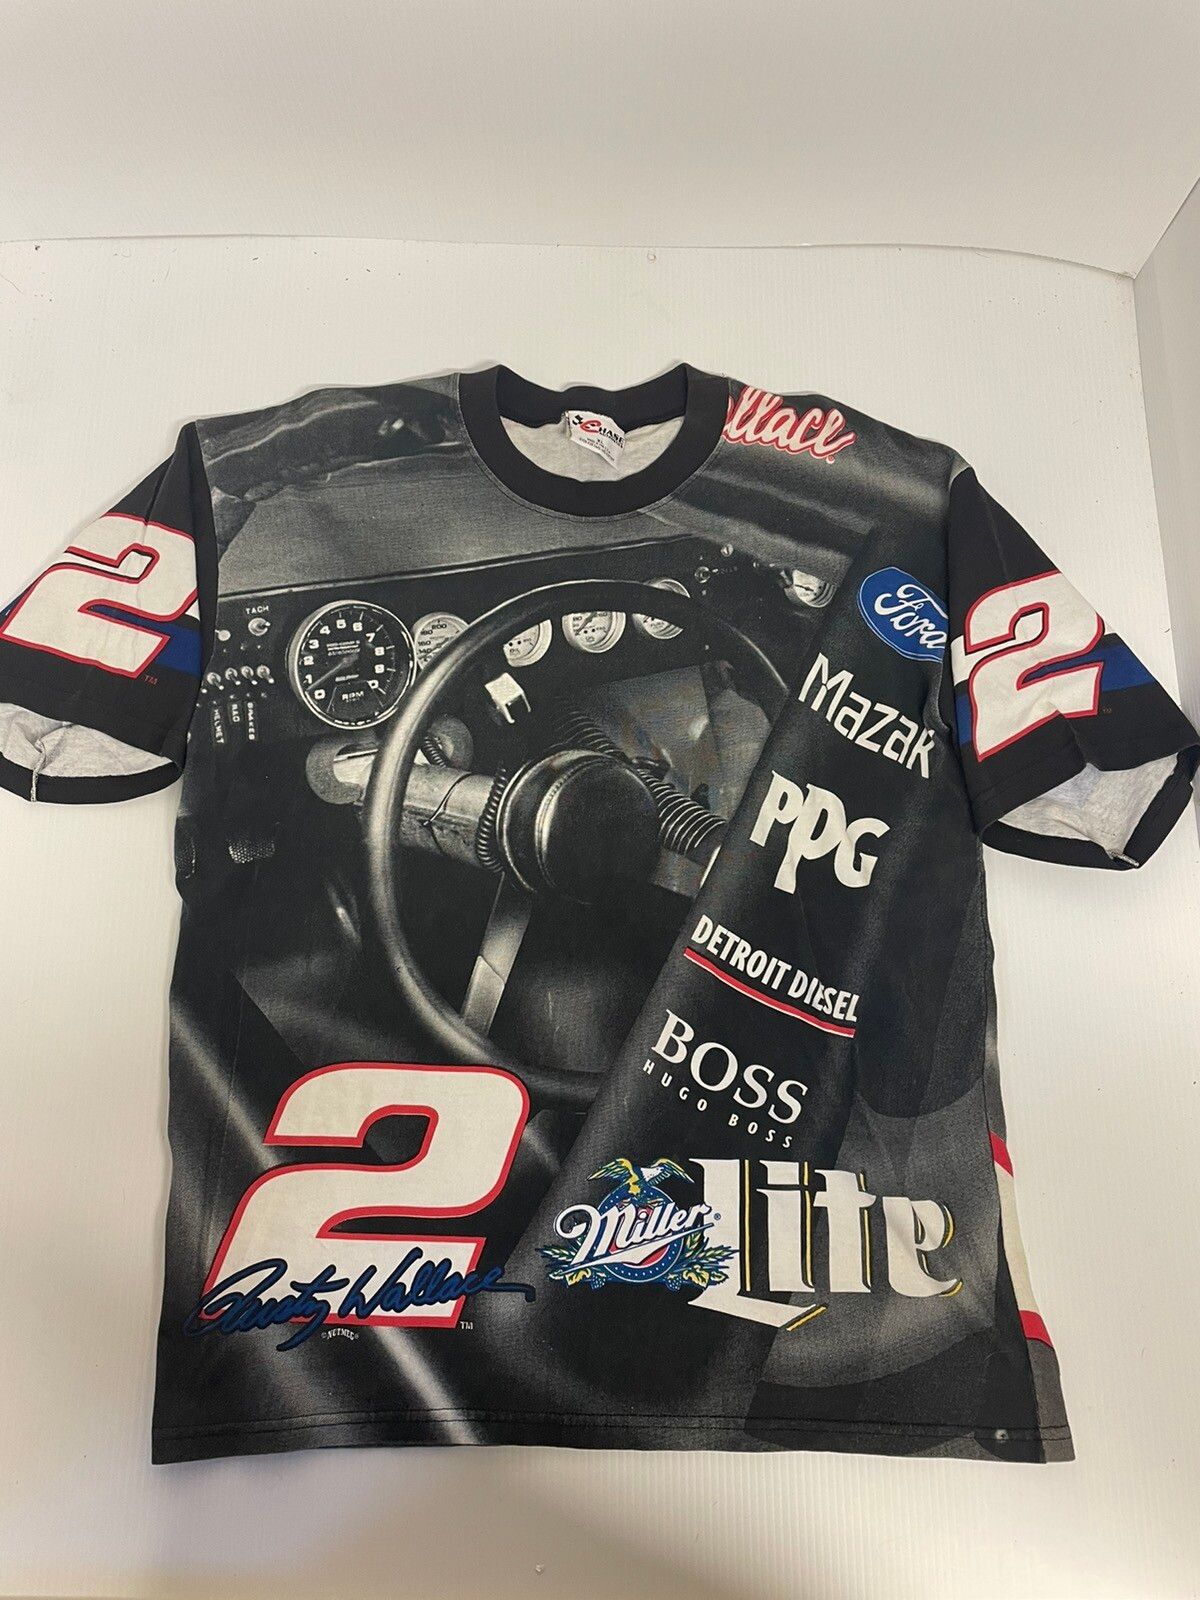 Chase Authentics Miller Lite Wallace Ford All Over Print Nascar Shirt Size XL Size US XL / EU 56 / 4 - 1 Preview